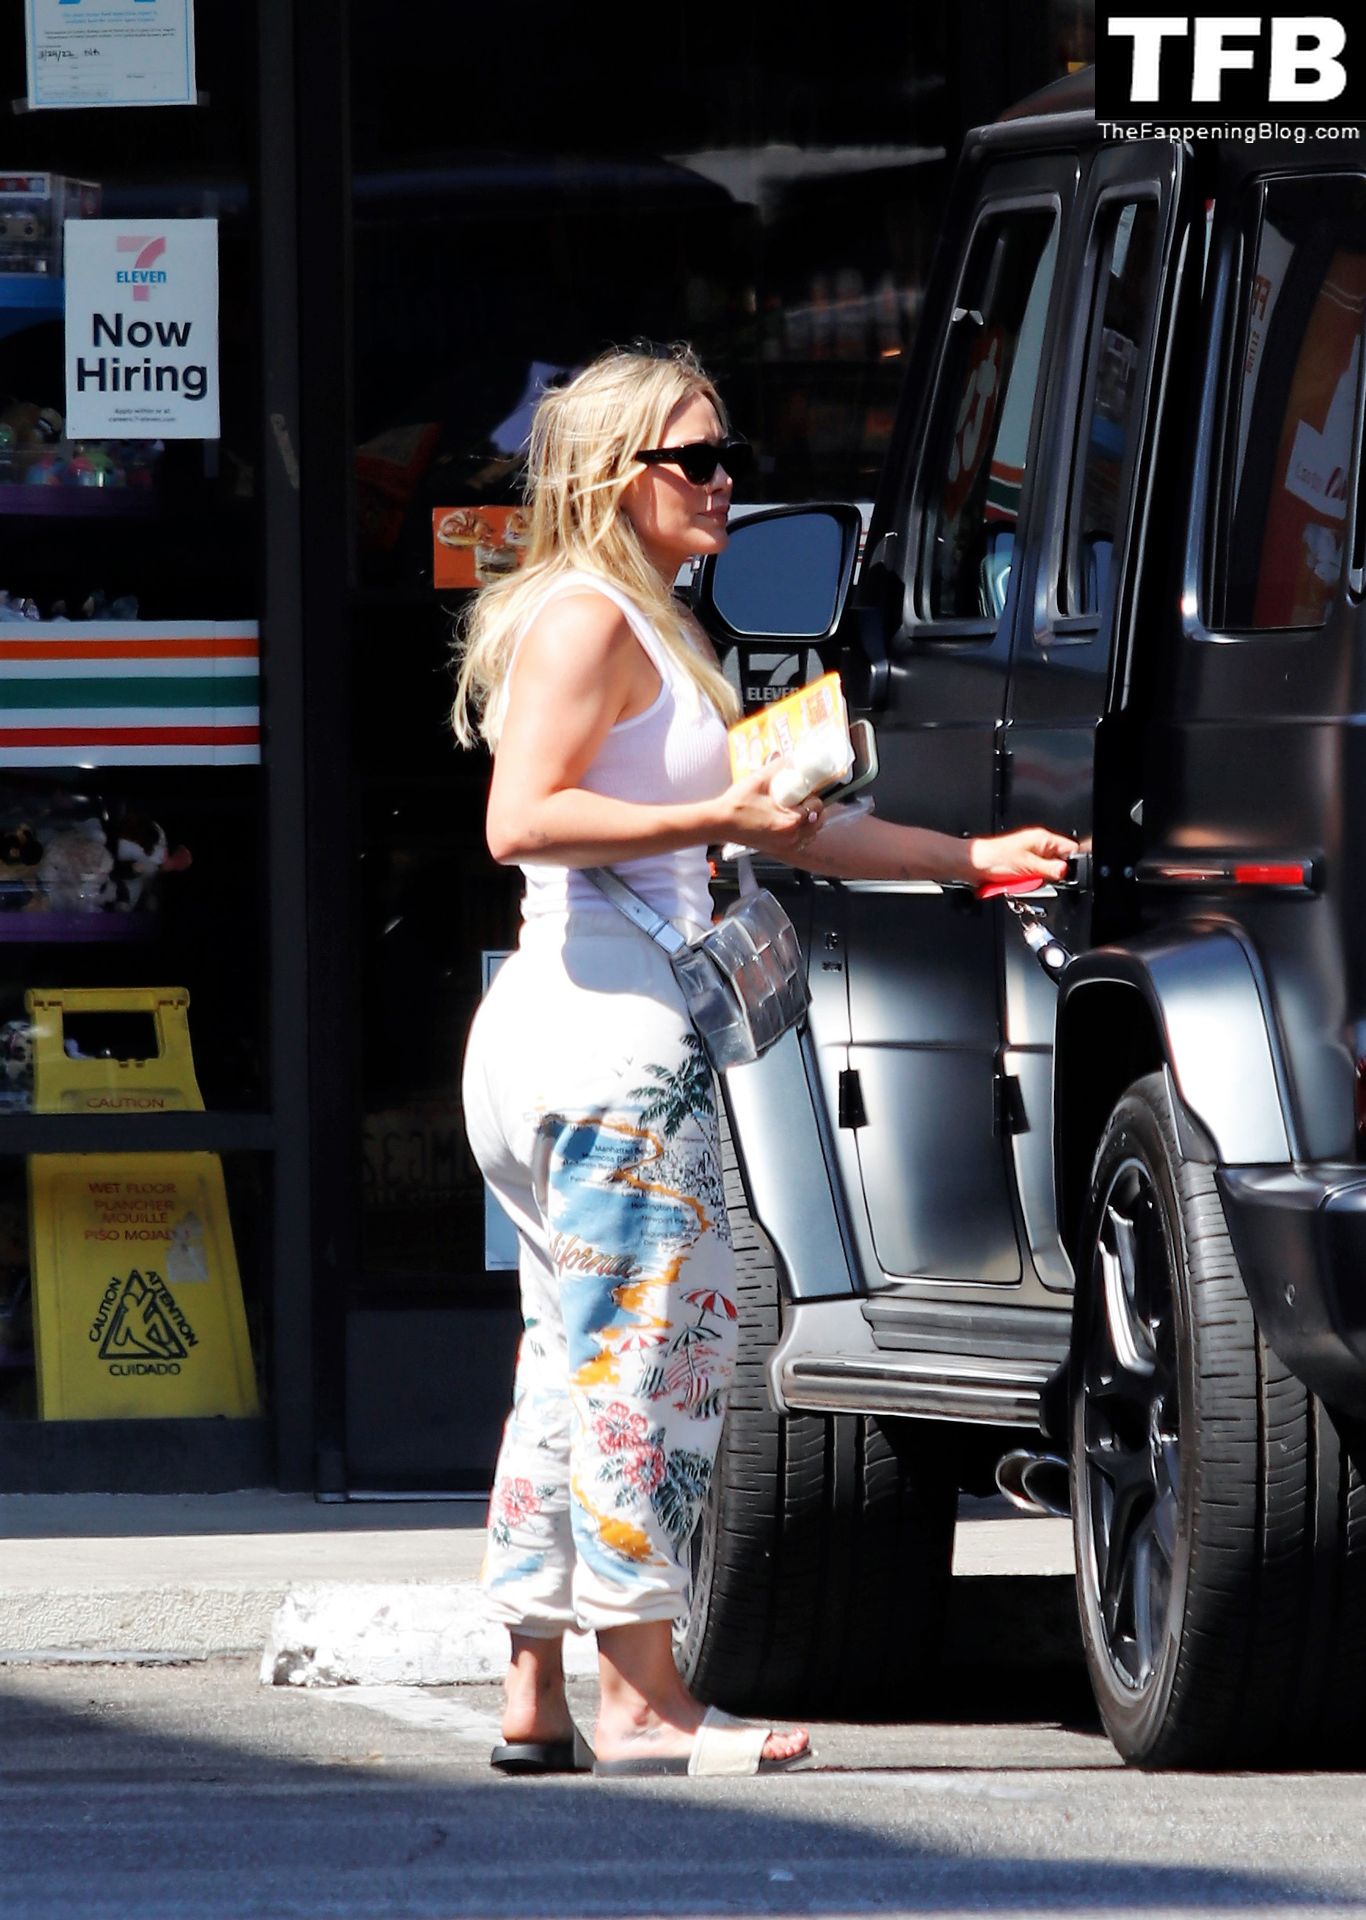 Hilary Duff is Pictured Dropping by a Convenience Store in LA (17 Photos)